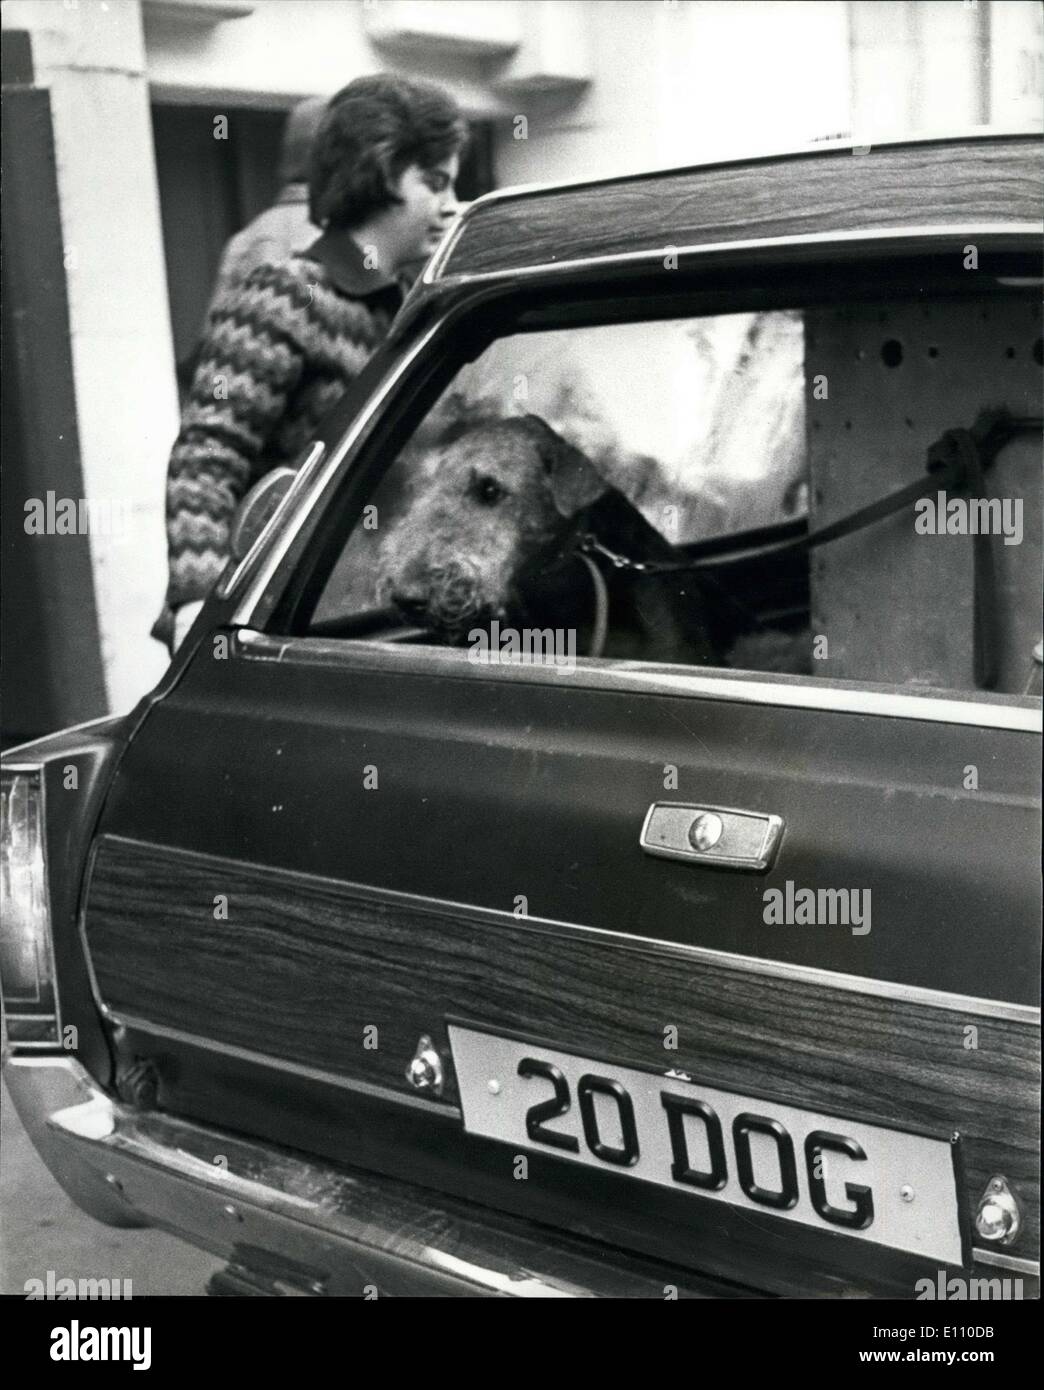 Feb. 07, 1975 - The annual Crufts Dog Show Opens today At Olympia - London: Picture Shows: Arriving in style this dog arrives at the show in his owner's car which bears an appropriate number plate today. Stock Photo